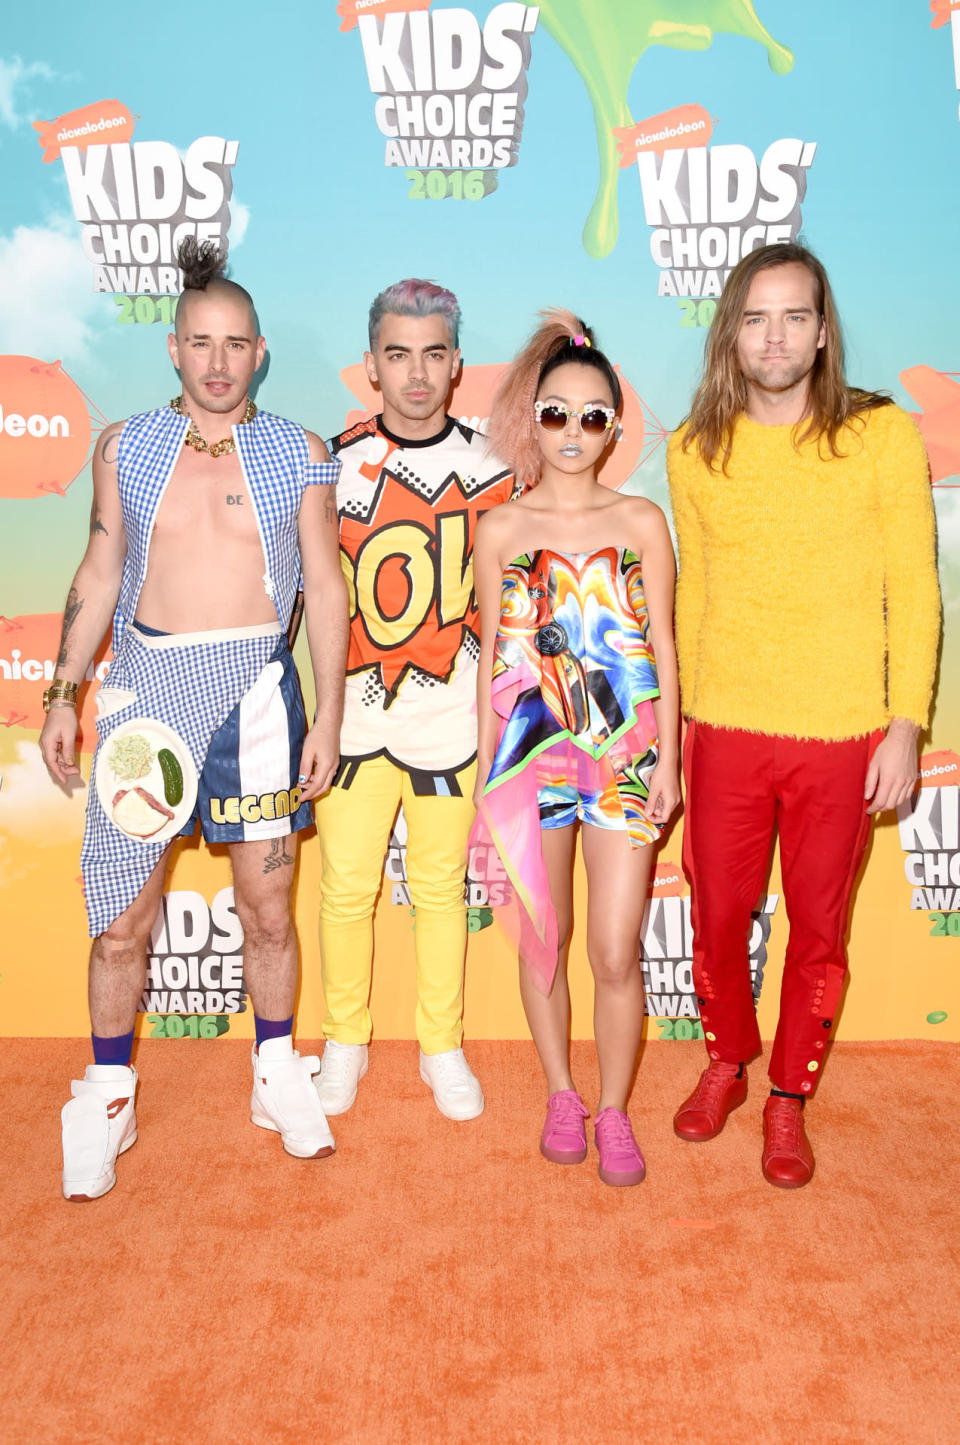 DNCE was hard to miss at the 2016 Kids’ Choice Awards